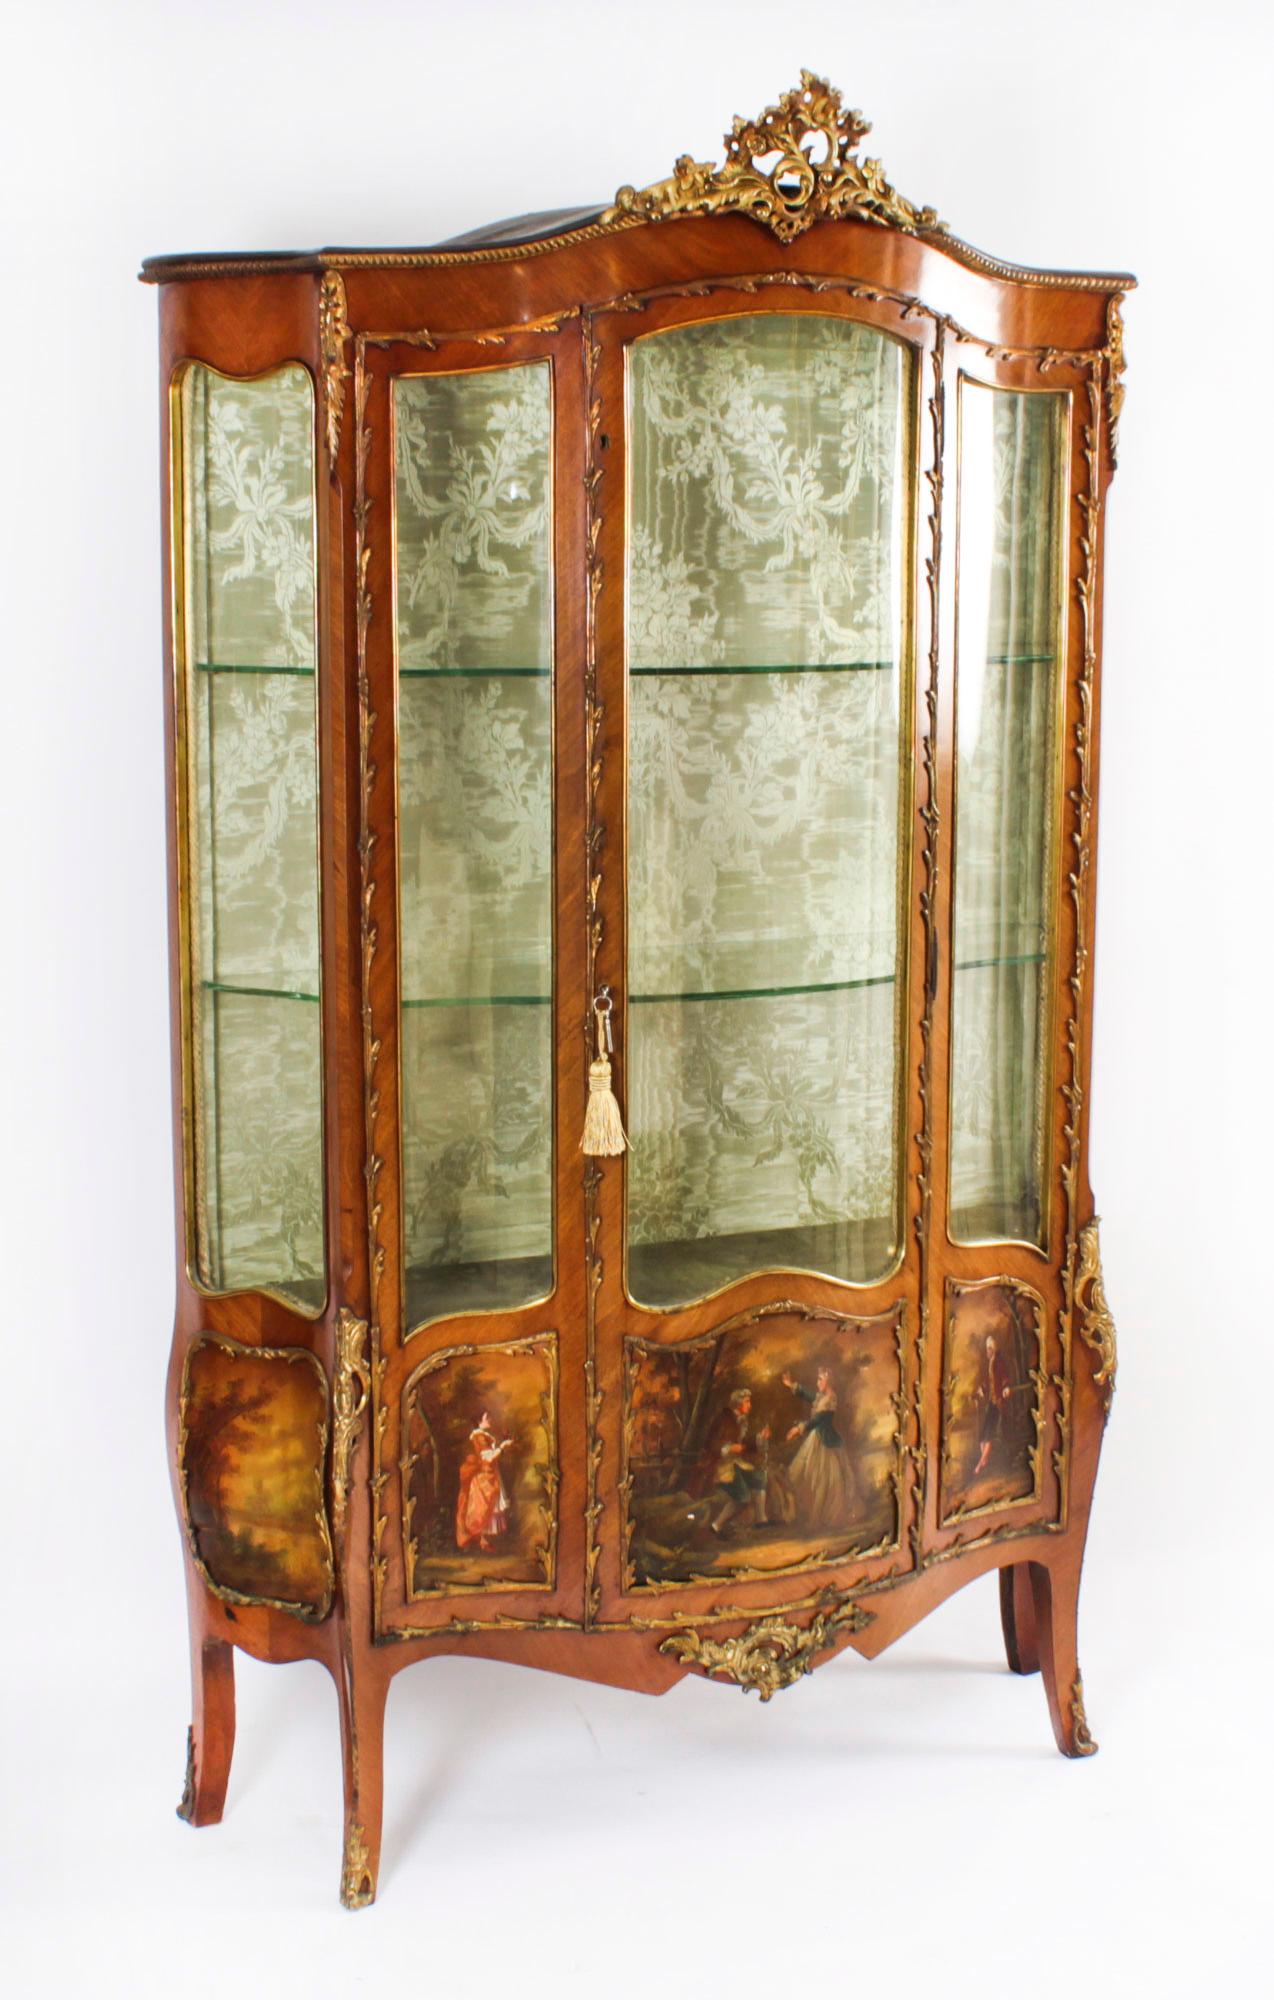 A stunning antique Louis XV Revival French Vernis Marten five panel display cabinet of extravagantly shaped serpentine form, Circa 1880 in date, with exquisite hand painted decoration and exquisite ormolu mounts.

There are five Vernis Martin panels